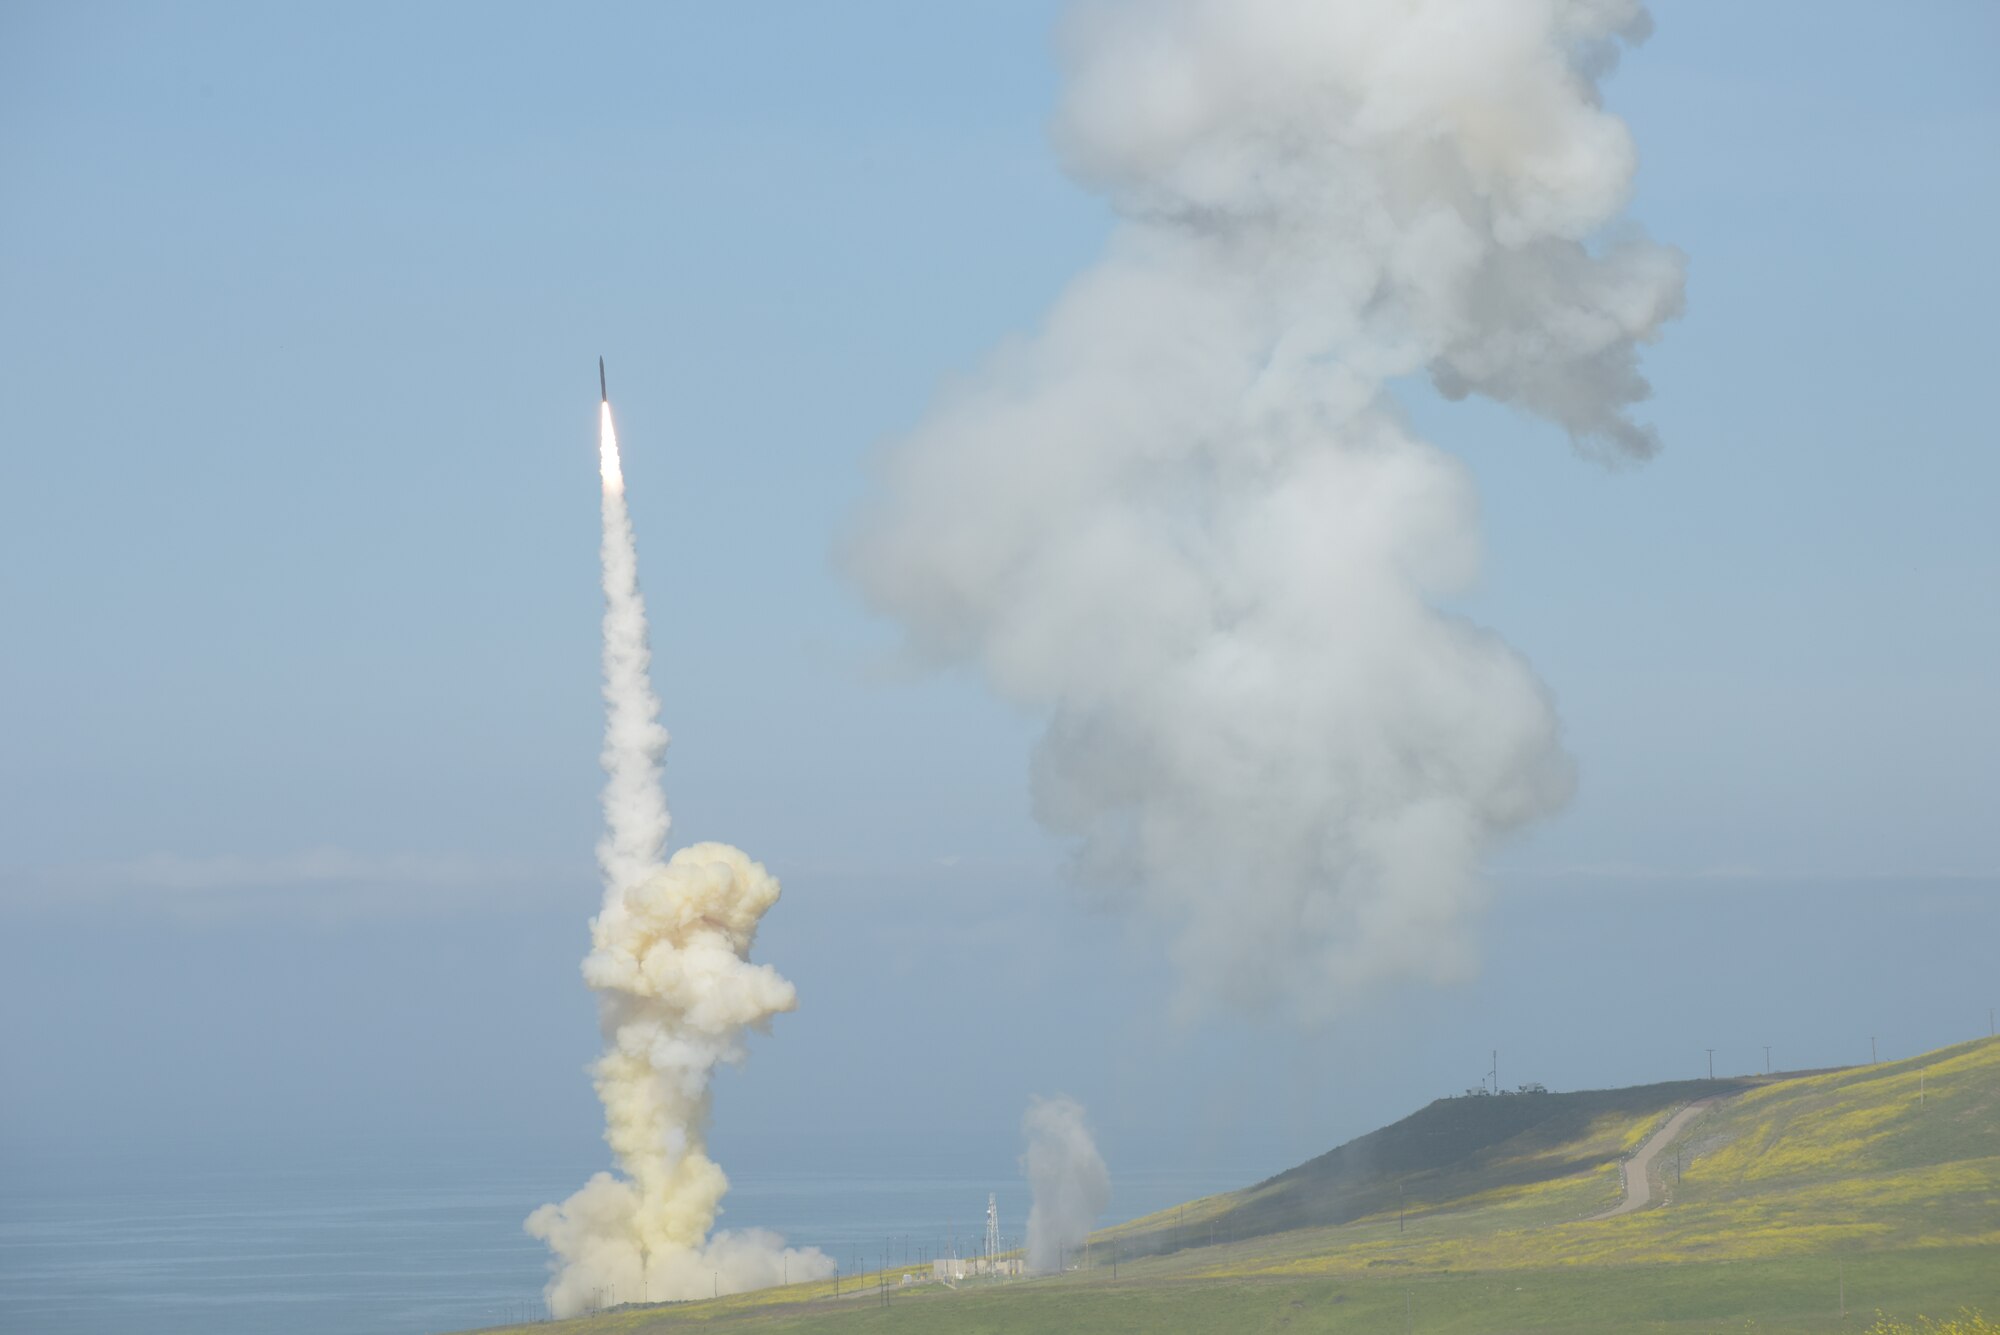 The 'trail' Ground-based Interceptor (GBI) launches from Vandenberg Air Force Base, California, March 25, in the first-ever salvo engagement test of a threat-representative Intercontinental Ballistic Missile target. The AEDC 10-foot vacuum chamber at Arnold Air Force Base provided mission simulation capability for interceptor and its kill vehicle sensors. The chamber is able to characterize sensor performance in a space environment against simulated operational scenarios.  (Courtesy photo/Missile Defense Agency)